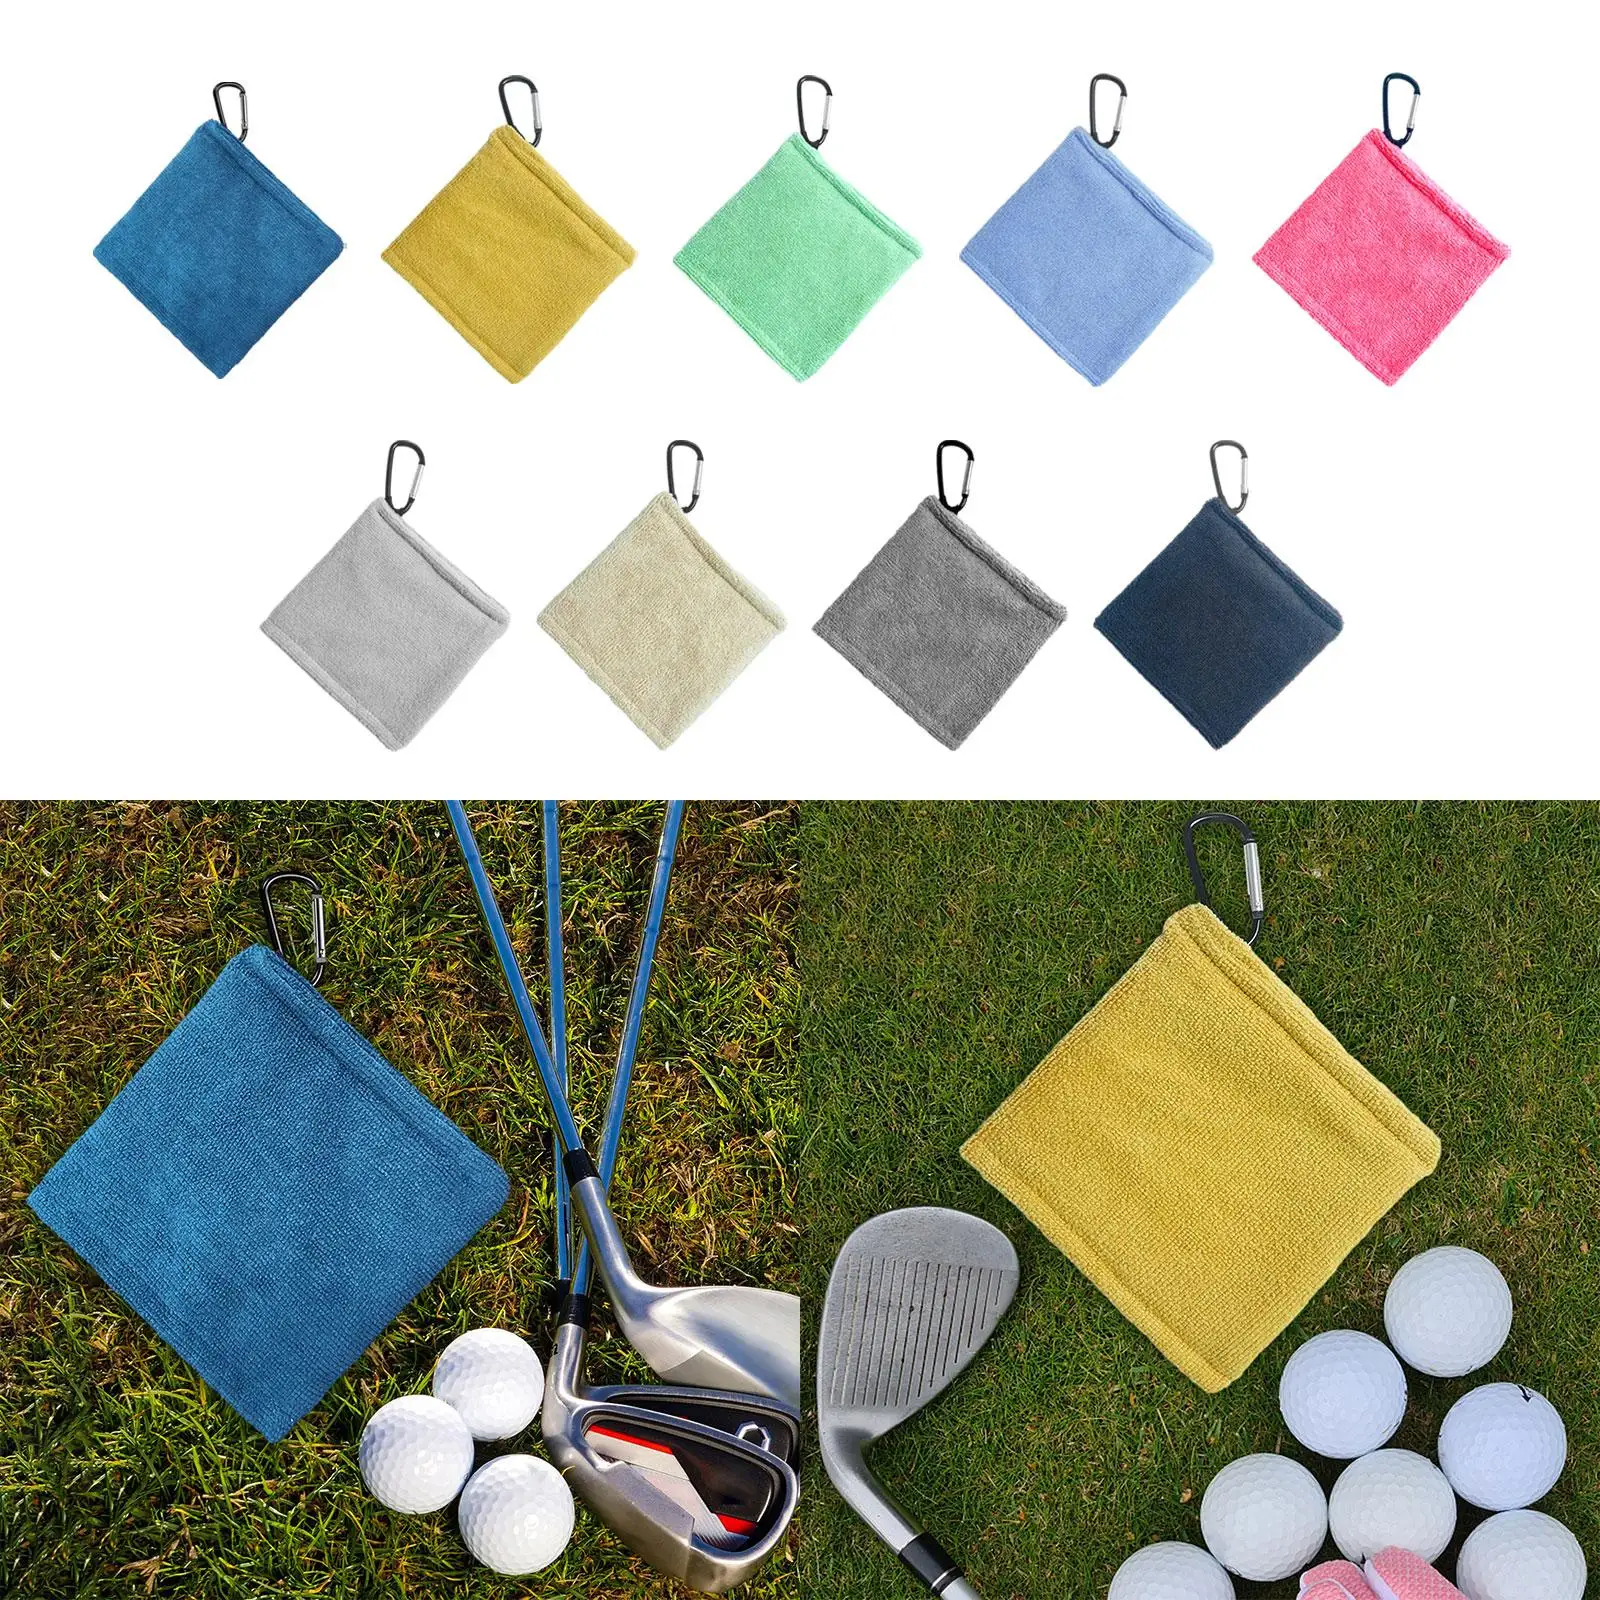 Golf Ball Towel with Clip Small Wipe Golf Club Golf Accessories 5.5 x 5.5 inch Golf Ball Cleaner Pocket Golf Accessory